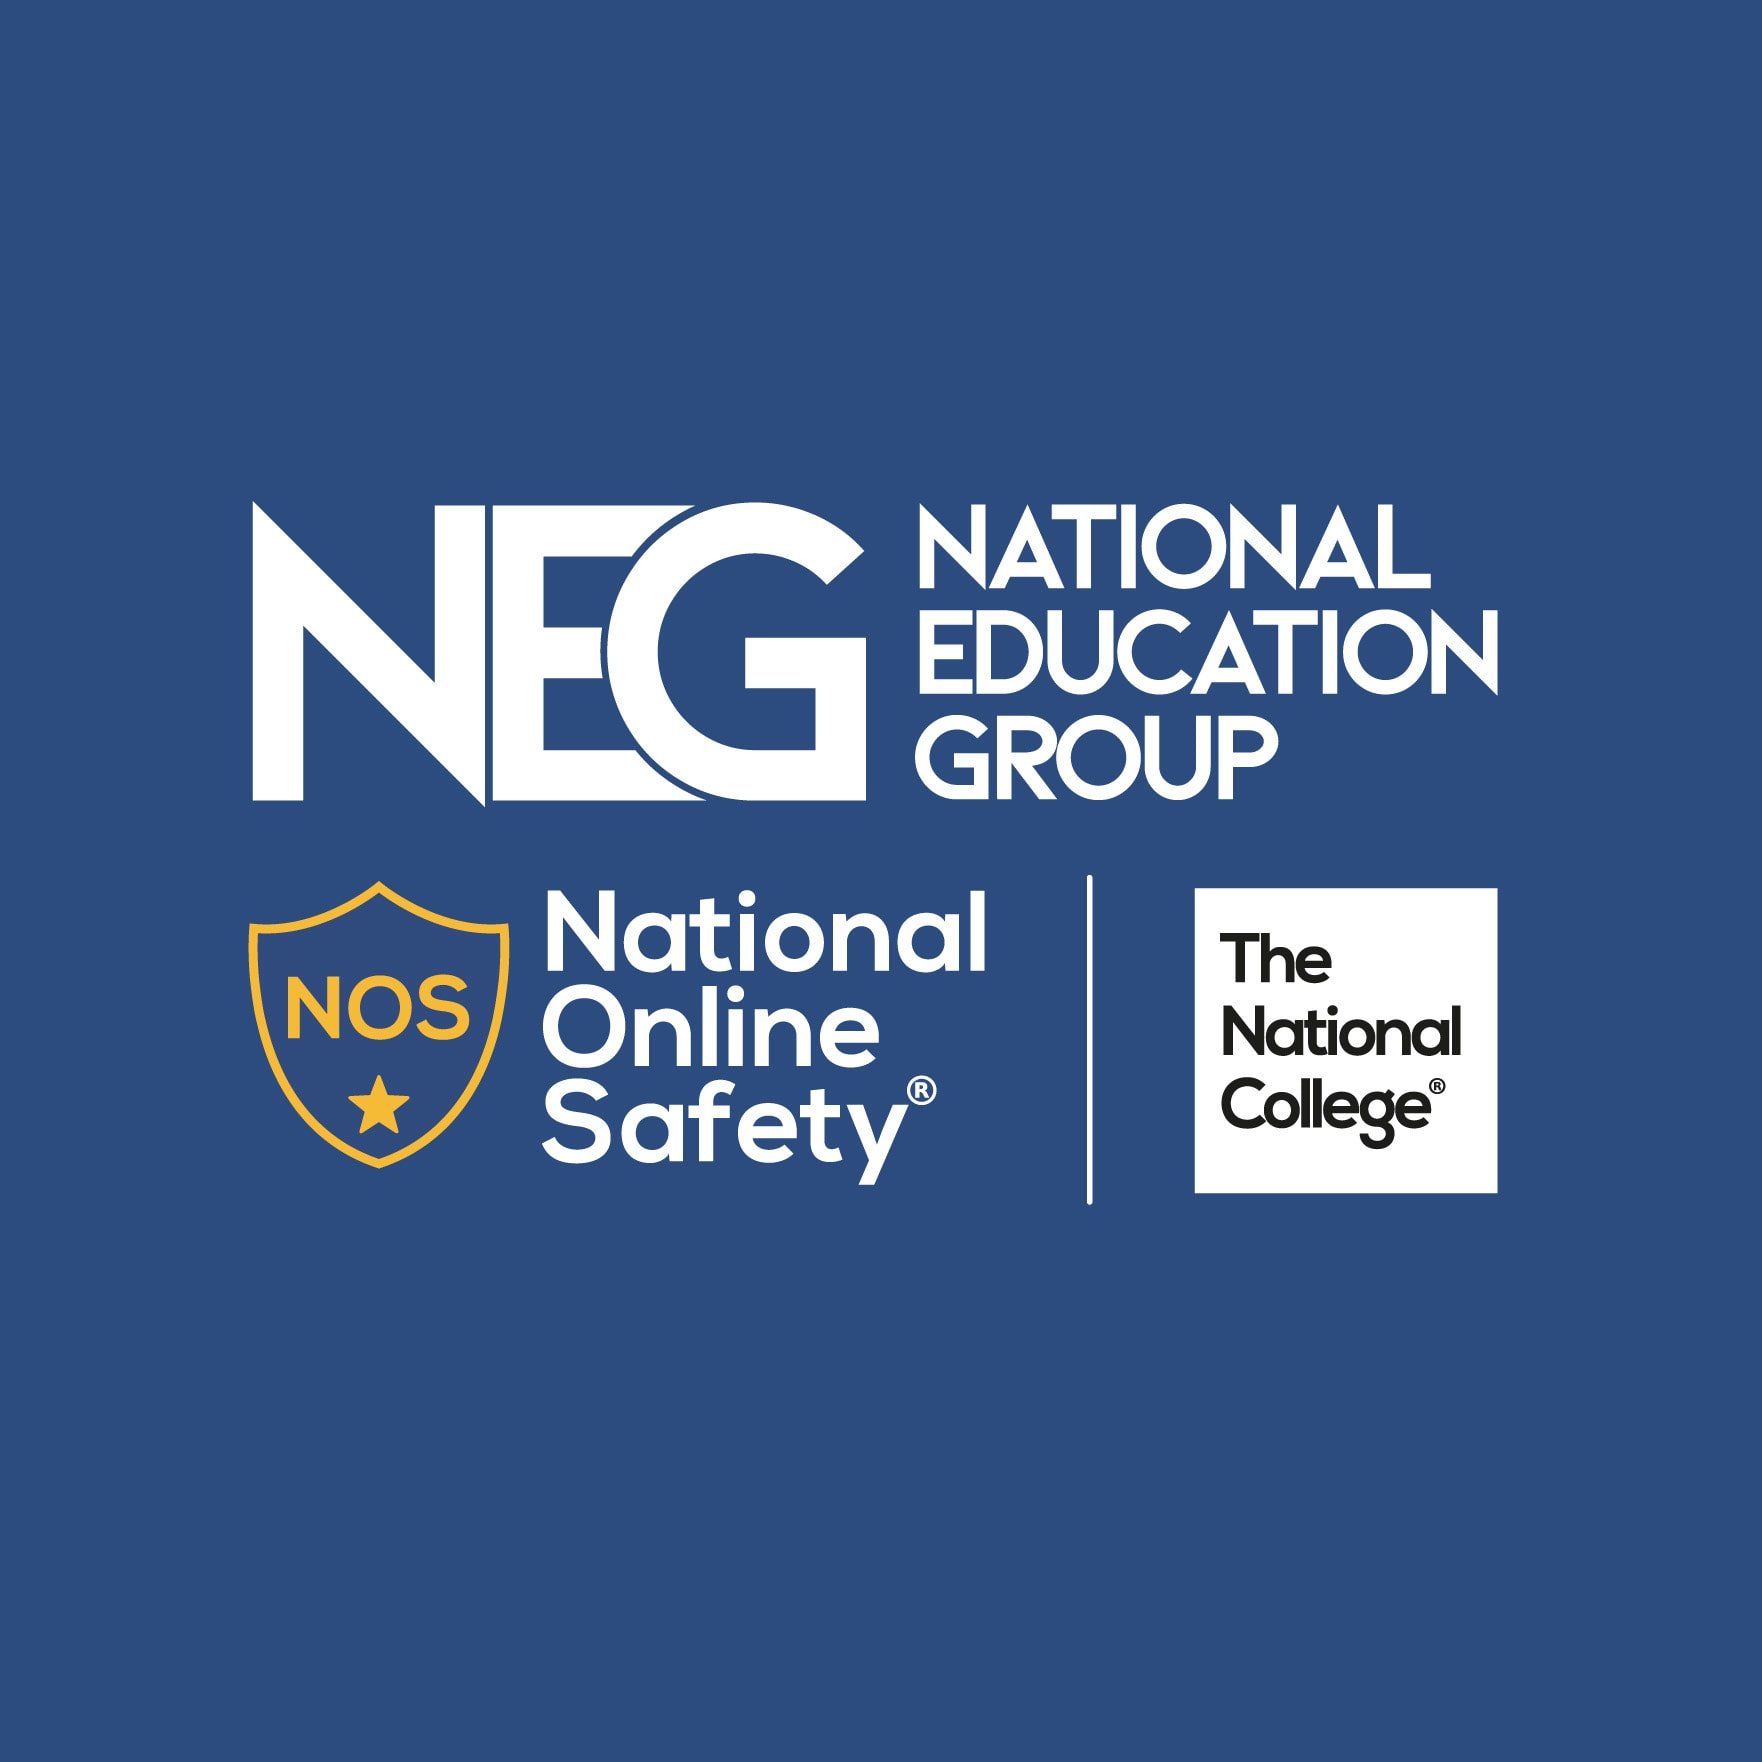 The National Education Group logo